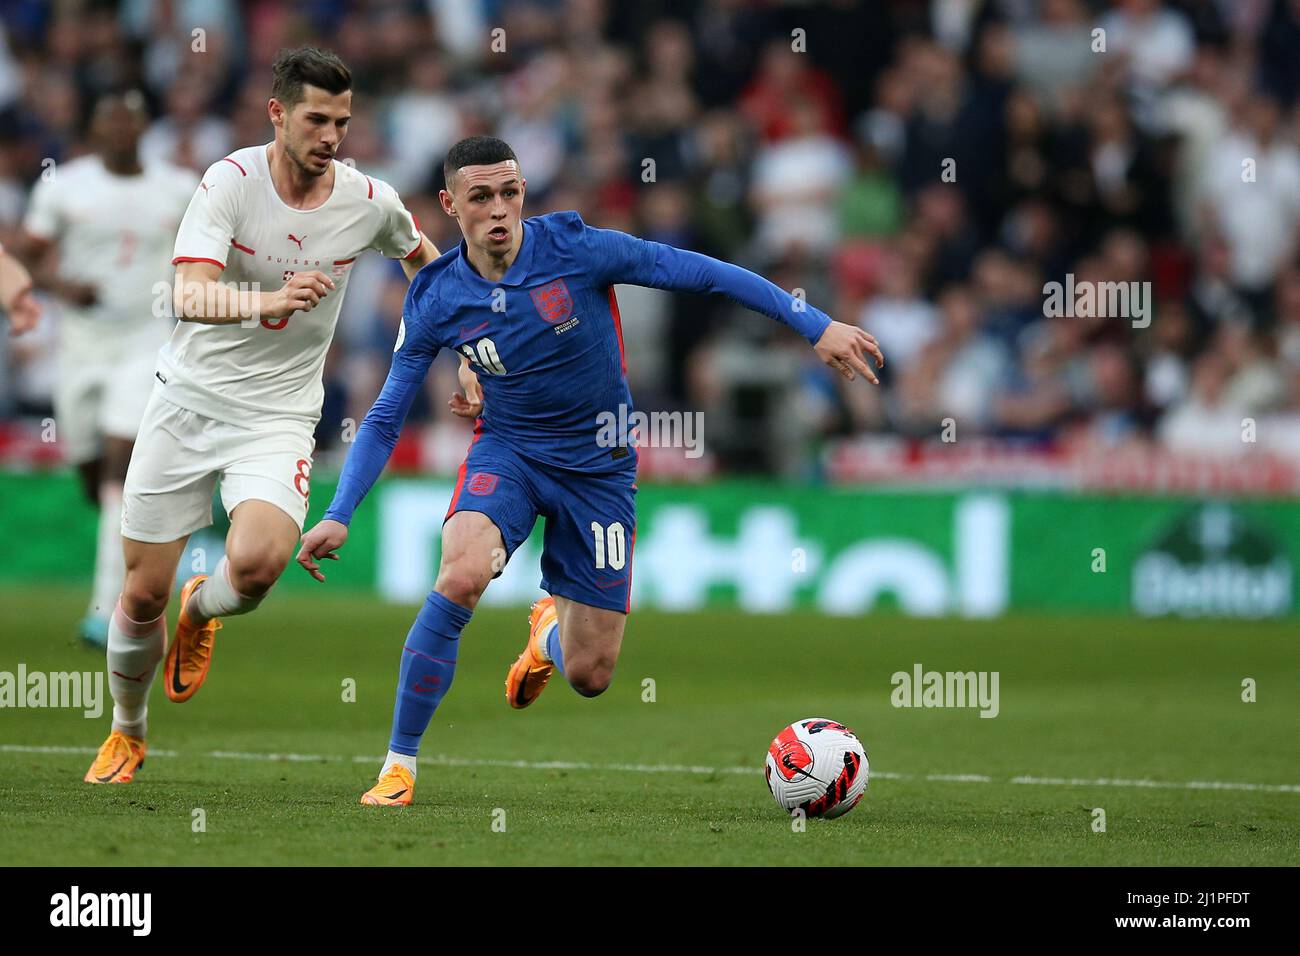 London, UK. 26th Mar, 2022. Phil Foden of England (10) in action. England v Switzerland, International football friendly designated Alzheimer's Society International match at Wembley Stadium in London on Saturday 26th March 2022. Editorial use only. pic by Andrew Orchard/Andrew Orchard sports photography/Alamy Live News Credit: Andrew Orchard sports photography/Alamy Live News Stock Photo